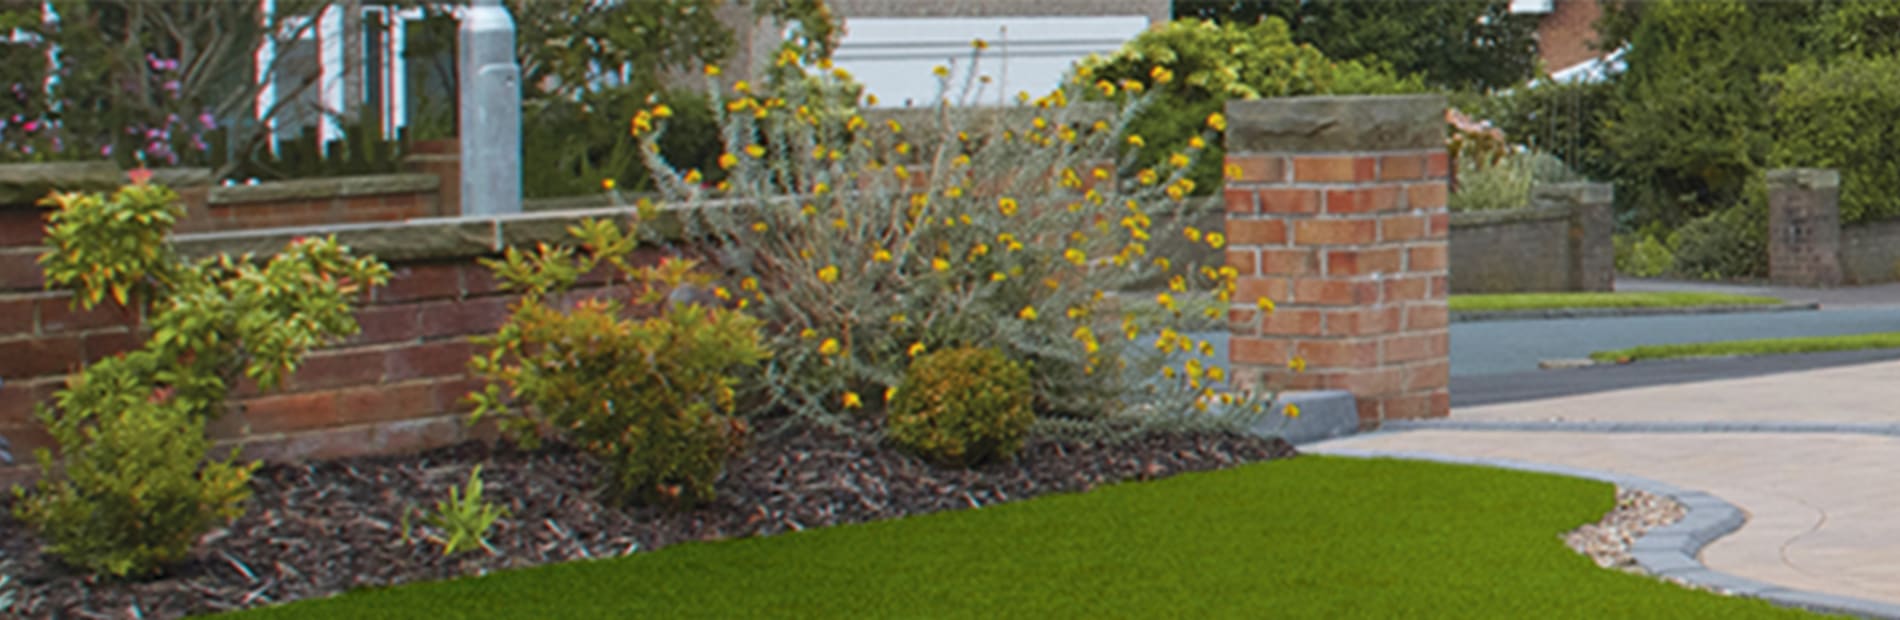 artificial grass used on a driveway